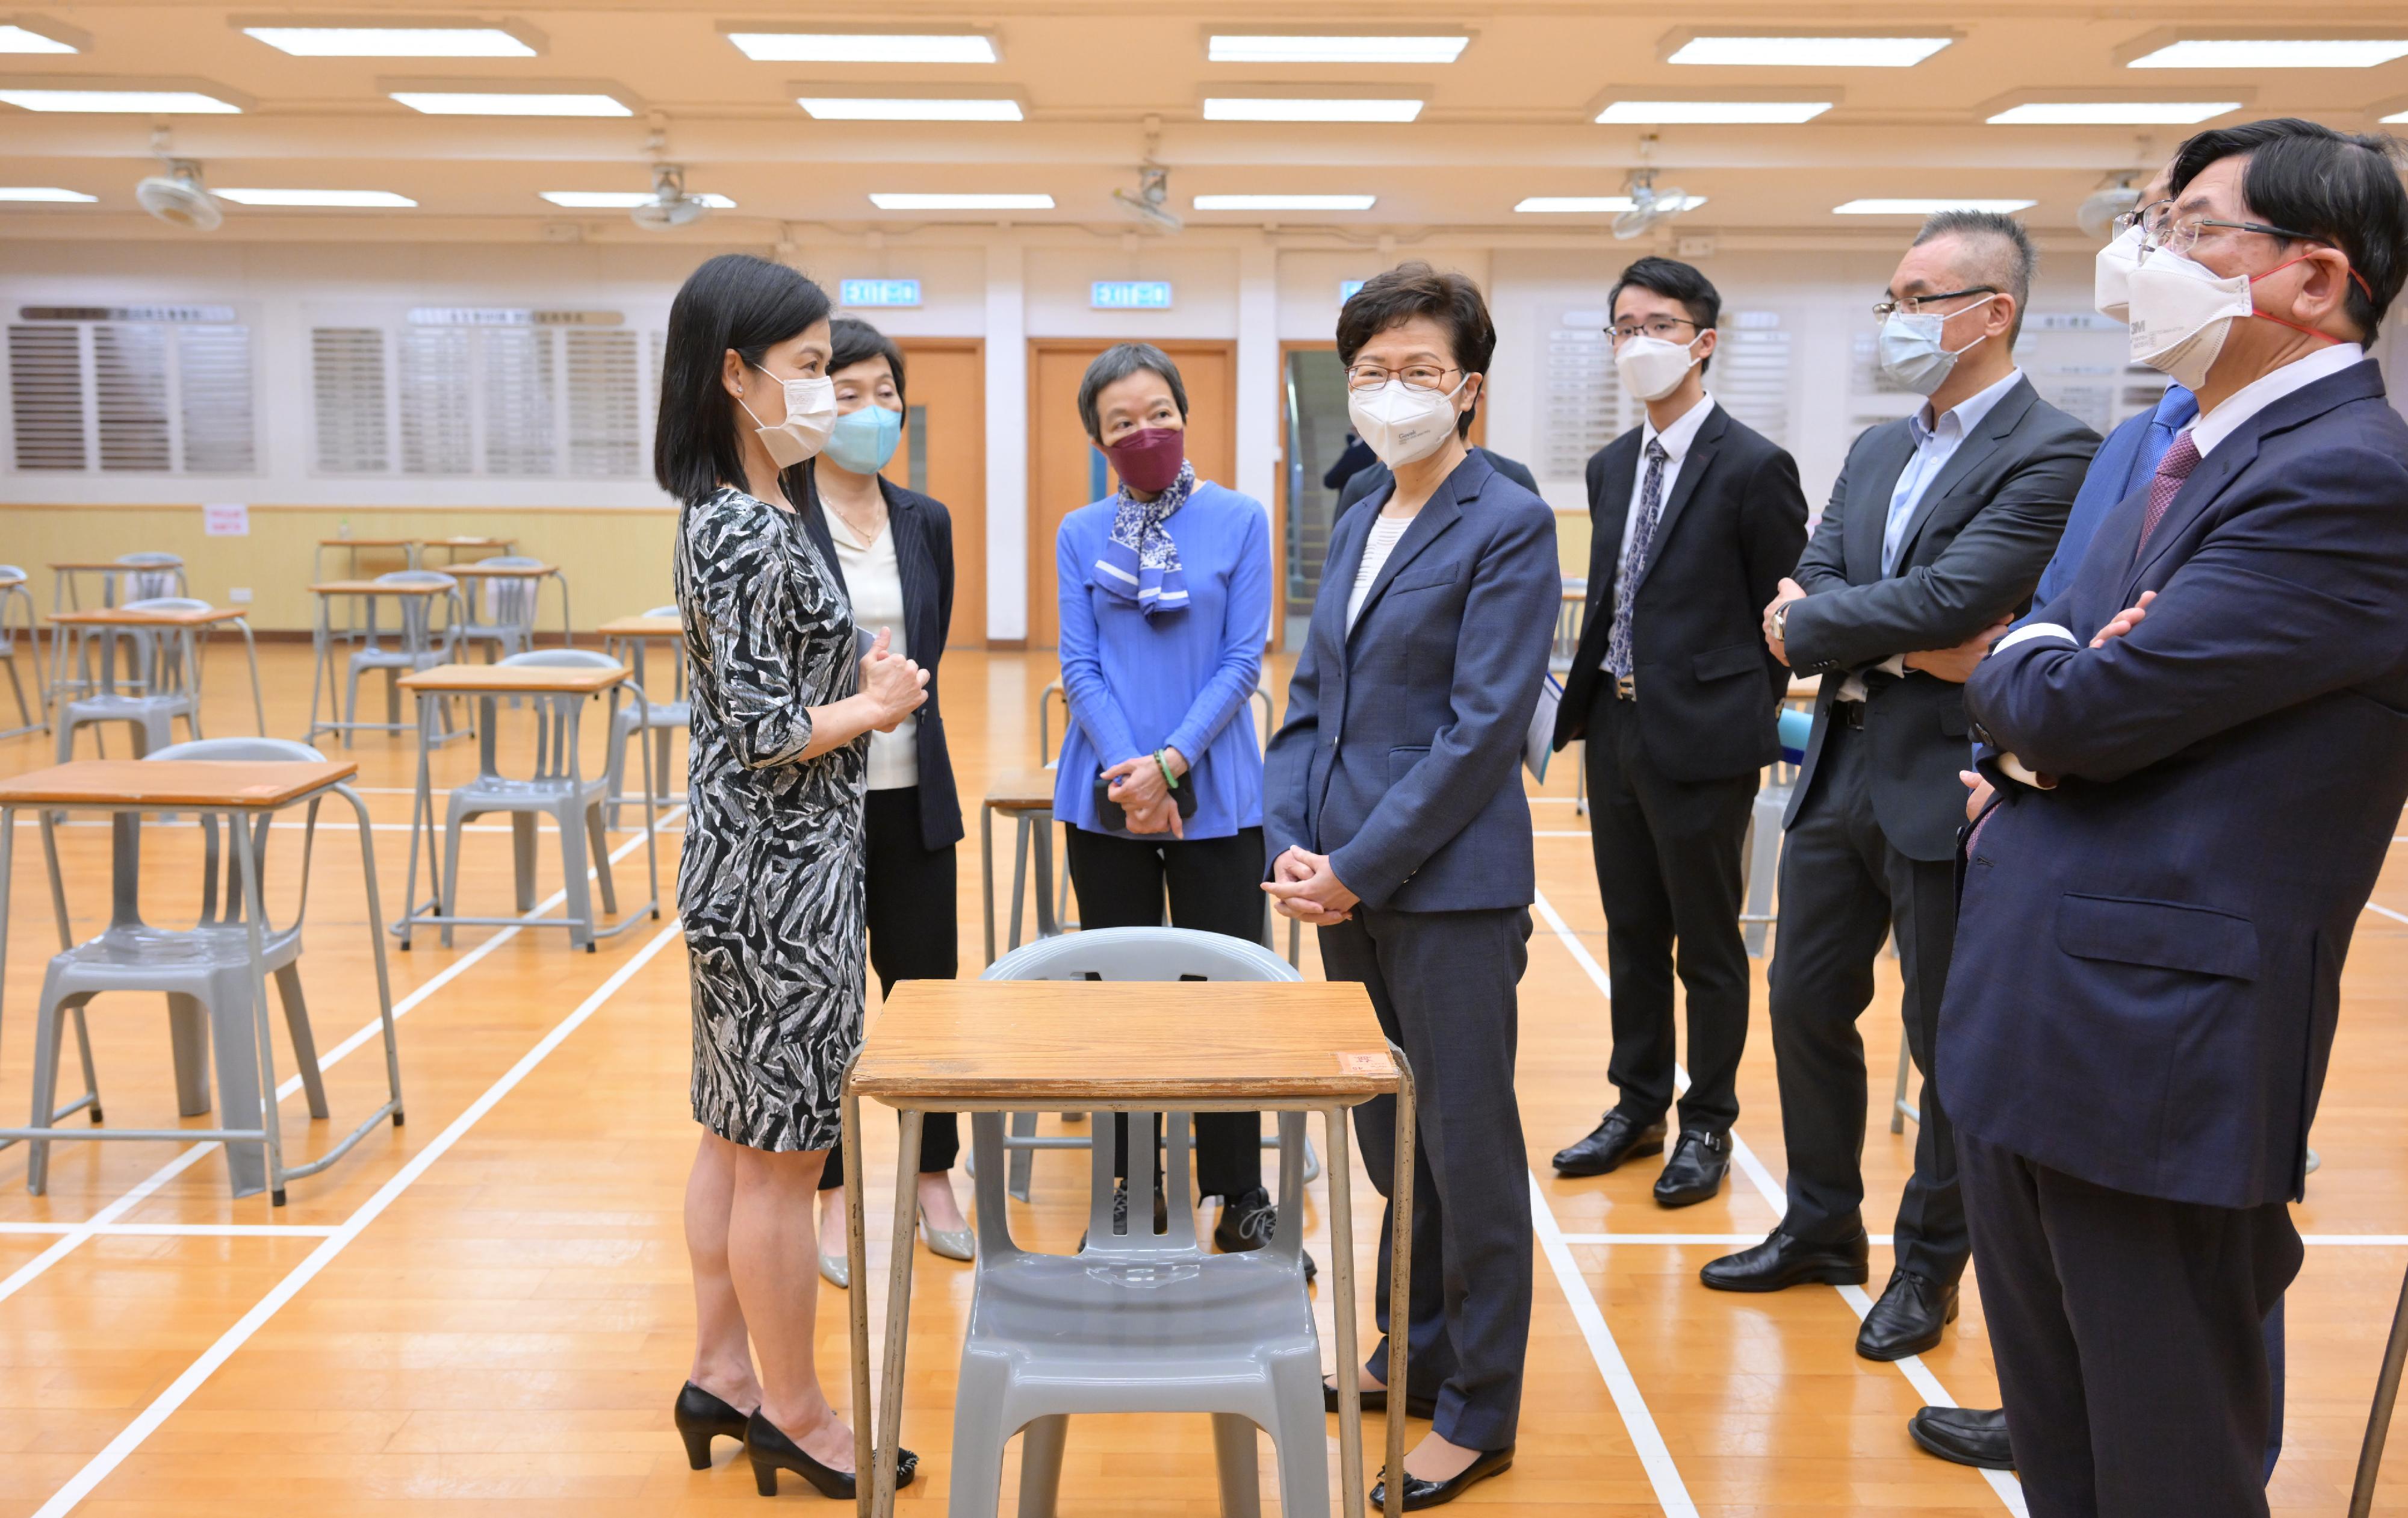 The Chief Executive, Mrs Carrie Lam, today (April 21) visited Clementi Secondary School, one of the examination centres of the Hong Kong Diploma of Secondary Education Examination, to learn more about the anti-epidemic measures in place at the school. Photo shows Mrs Lam (fourth right) receiving a briefing by the Principal of Clementi Secondary School, Ms Bonnie Lai (first left), on the relevant work. Looking on are the Under Secretary for Education, Dr Choi Yuk-lin (second left), and the Chairman of the Hong Kong Examinations and Assessment Authority, Mr Samuel Yung (first right).